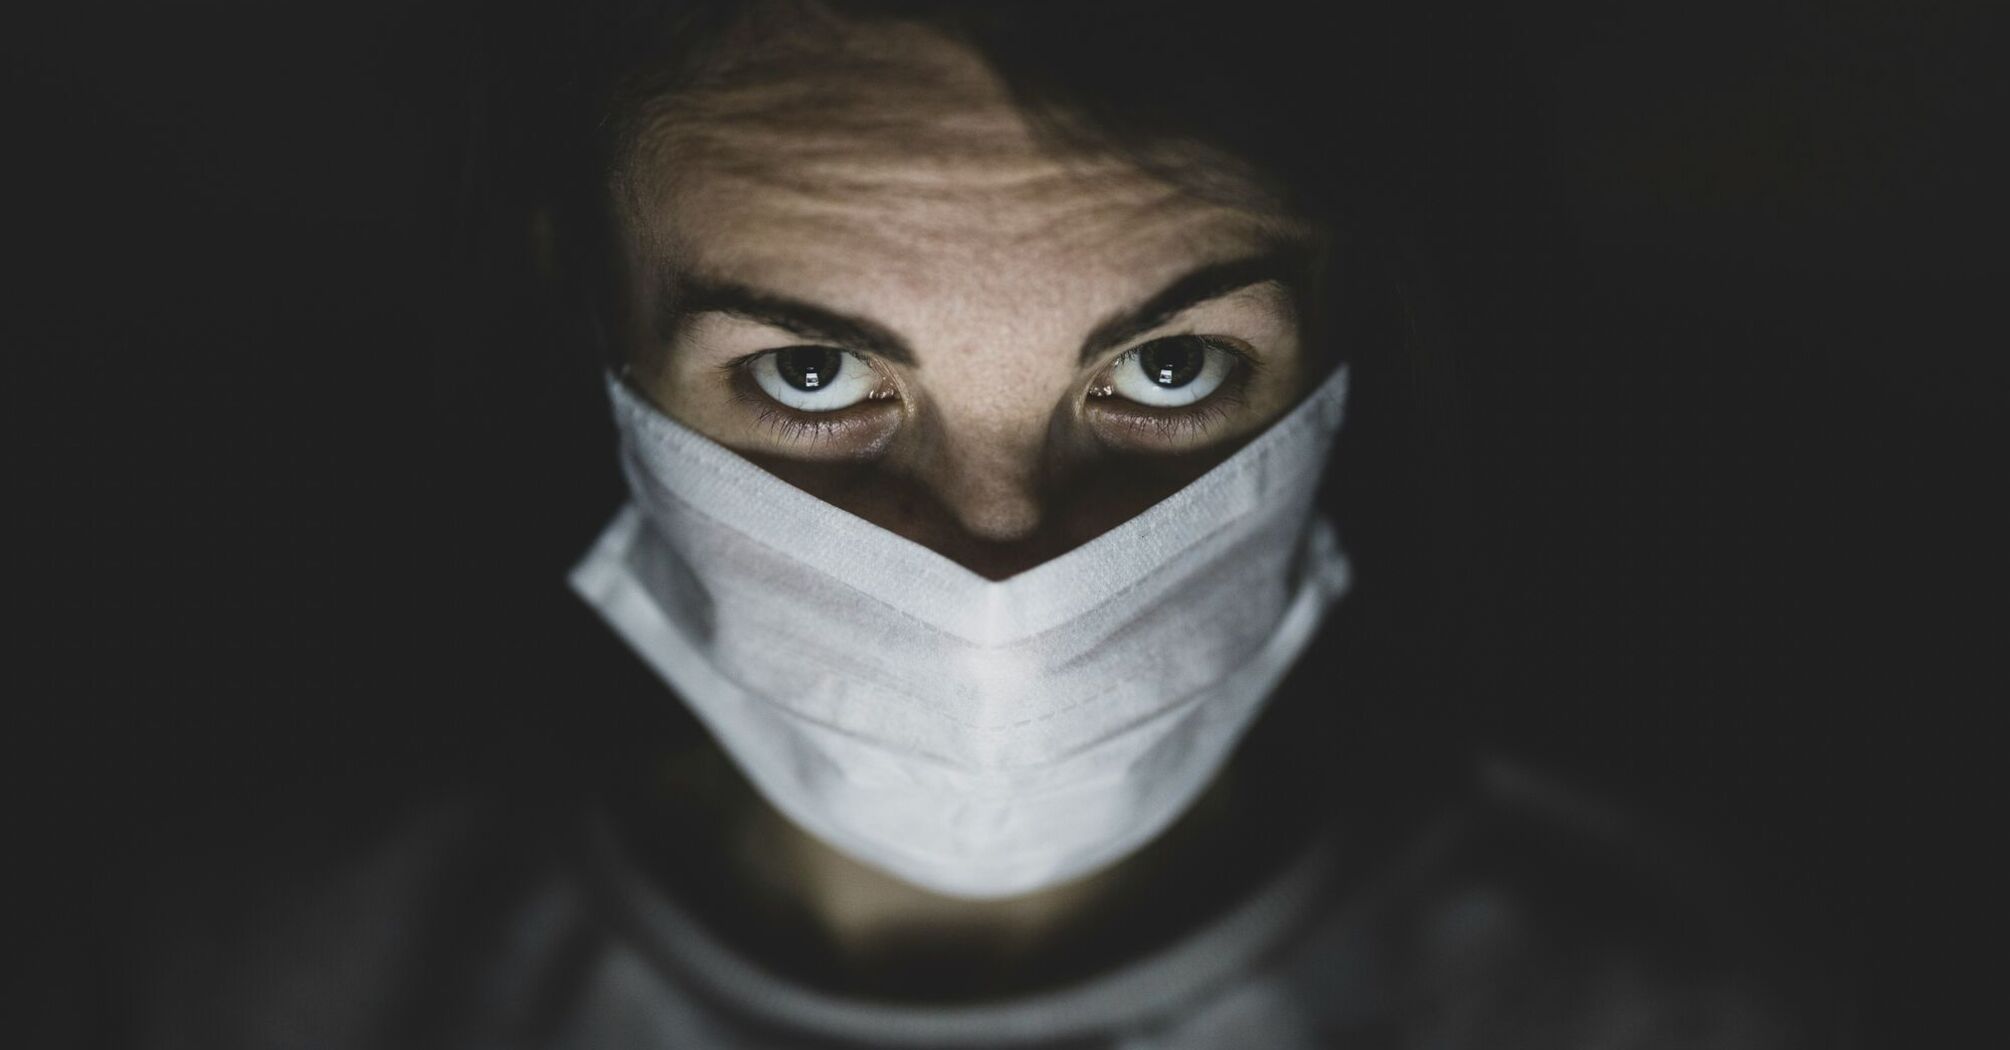 Person with intense gaze wearing a surgical mask in dim lighting